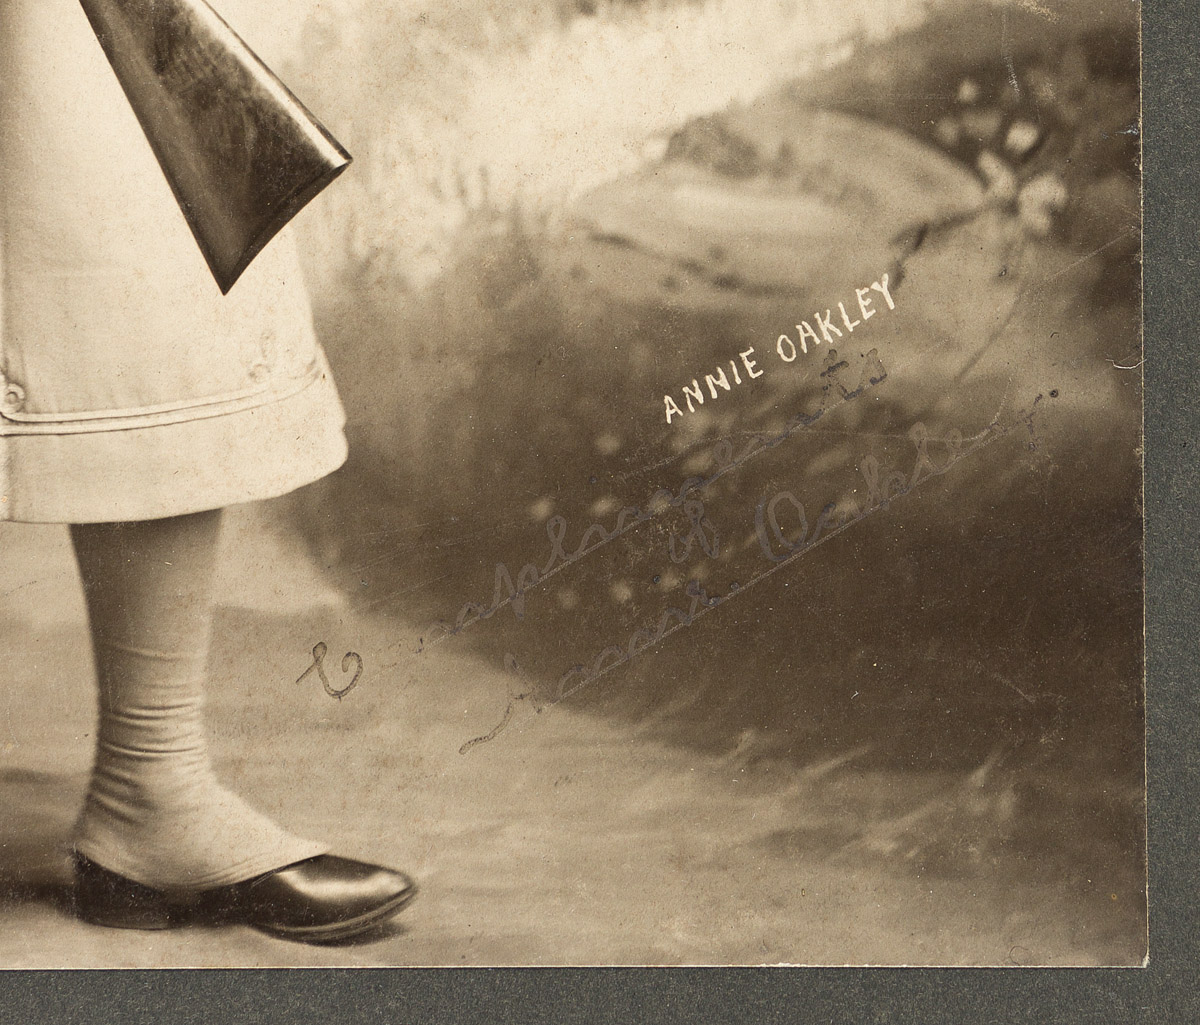 OAKLEY, ANNIE. Photograph Signed and Inscribed, Compliments,